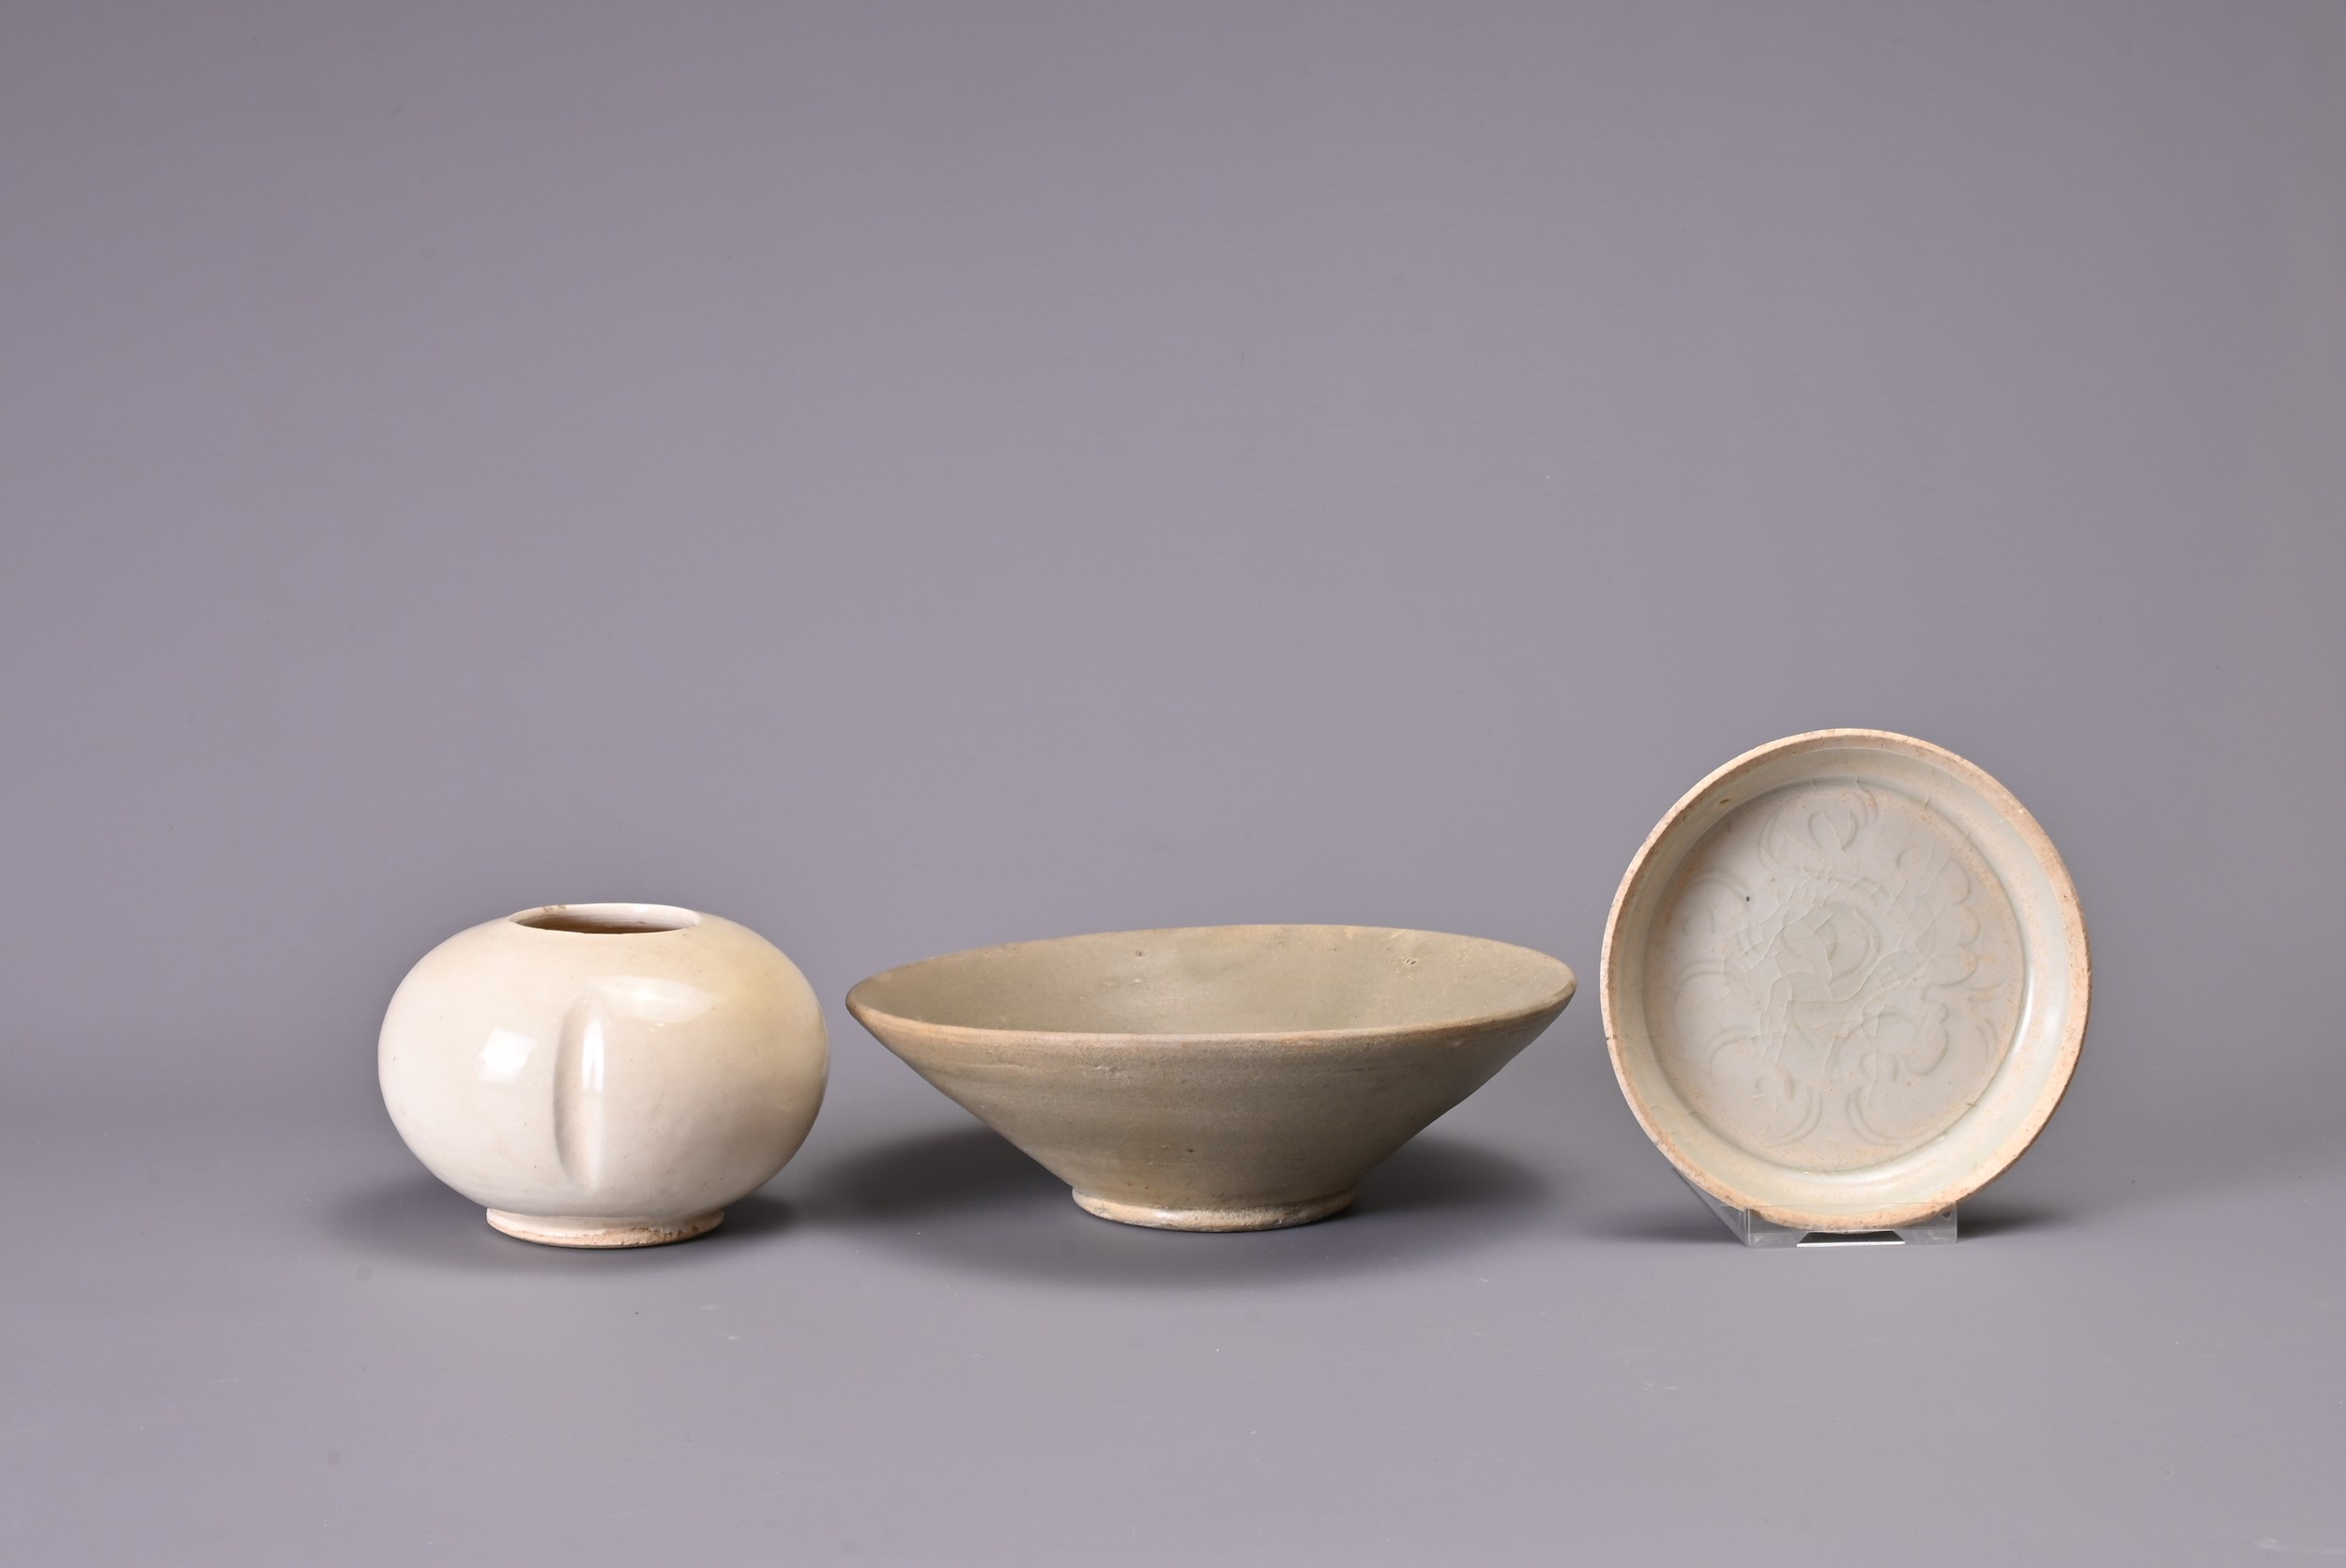 THREE CHINESE CELADON ITEMS. Comprising: a Tang Dynasty (AD 618-907) flared bowl, in dark green